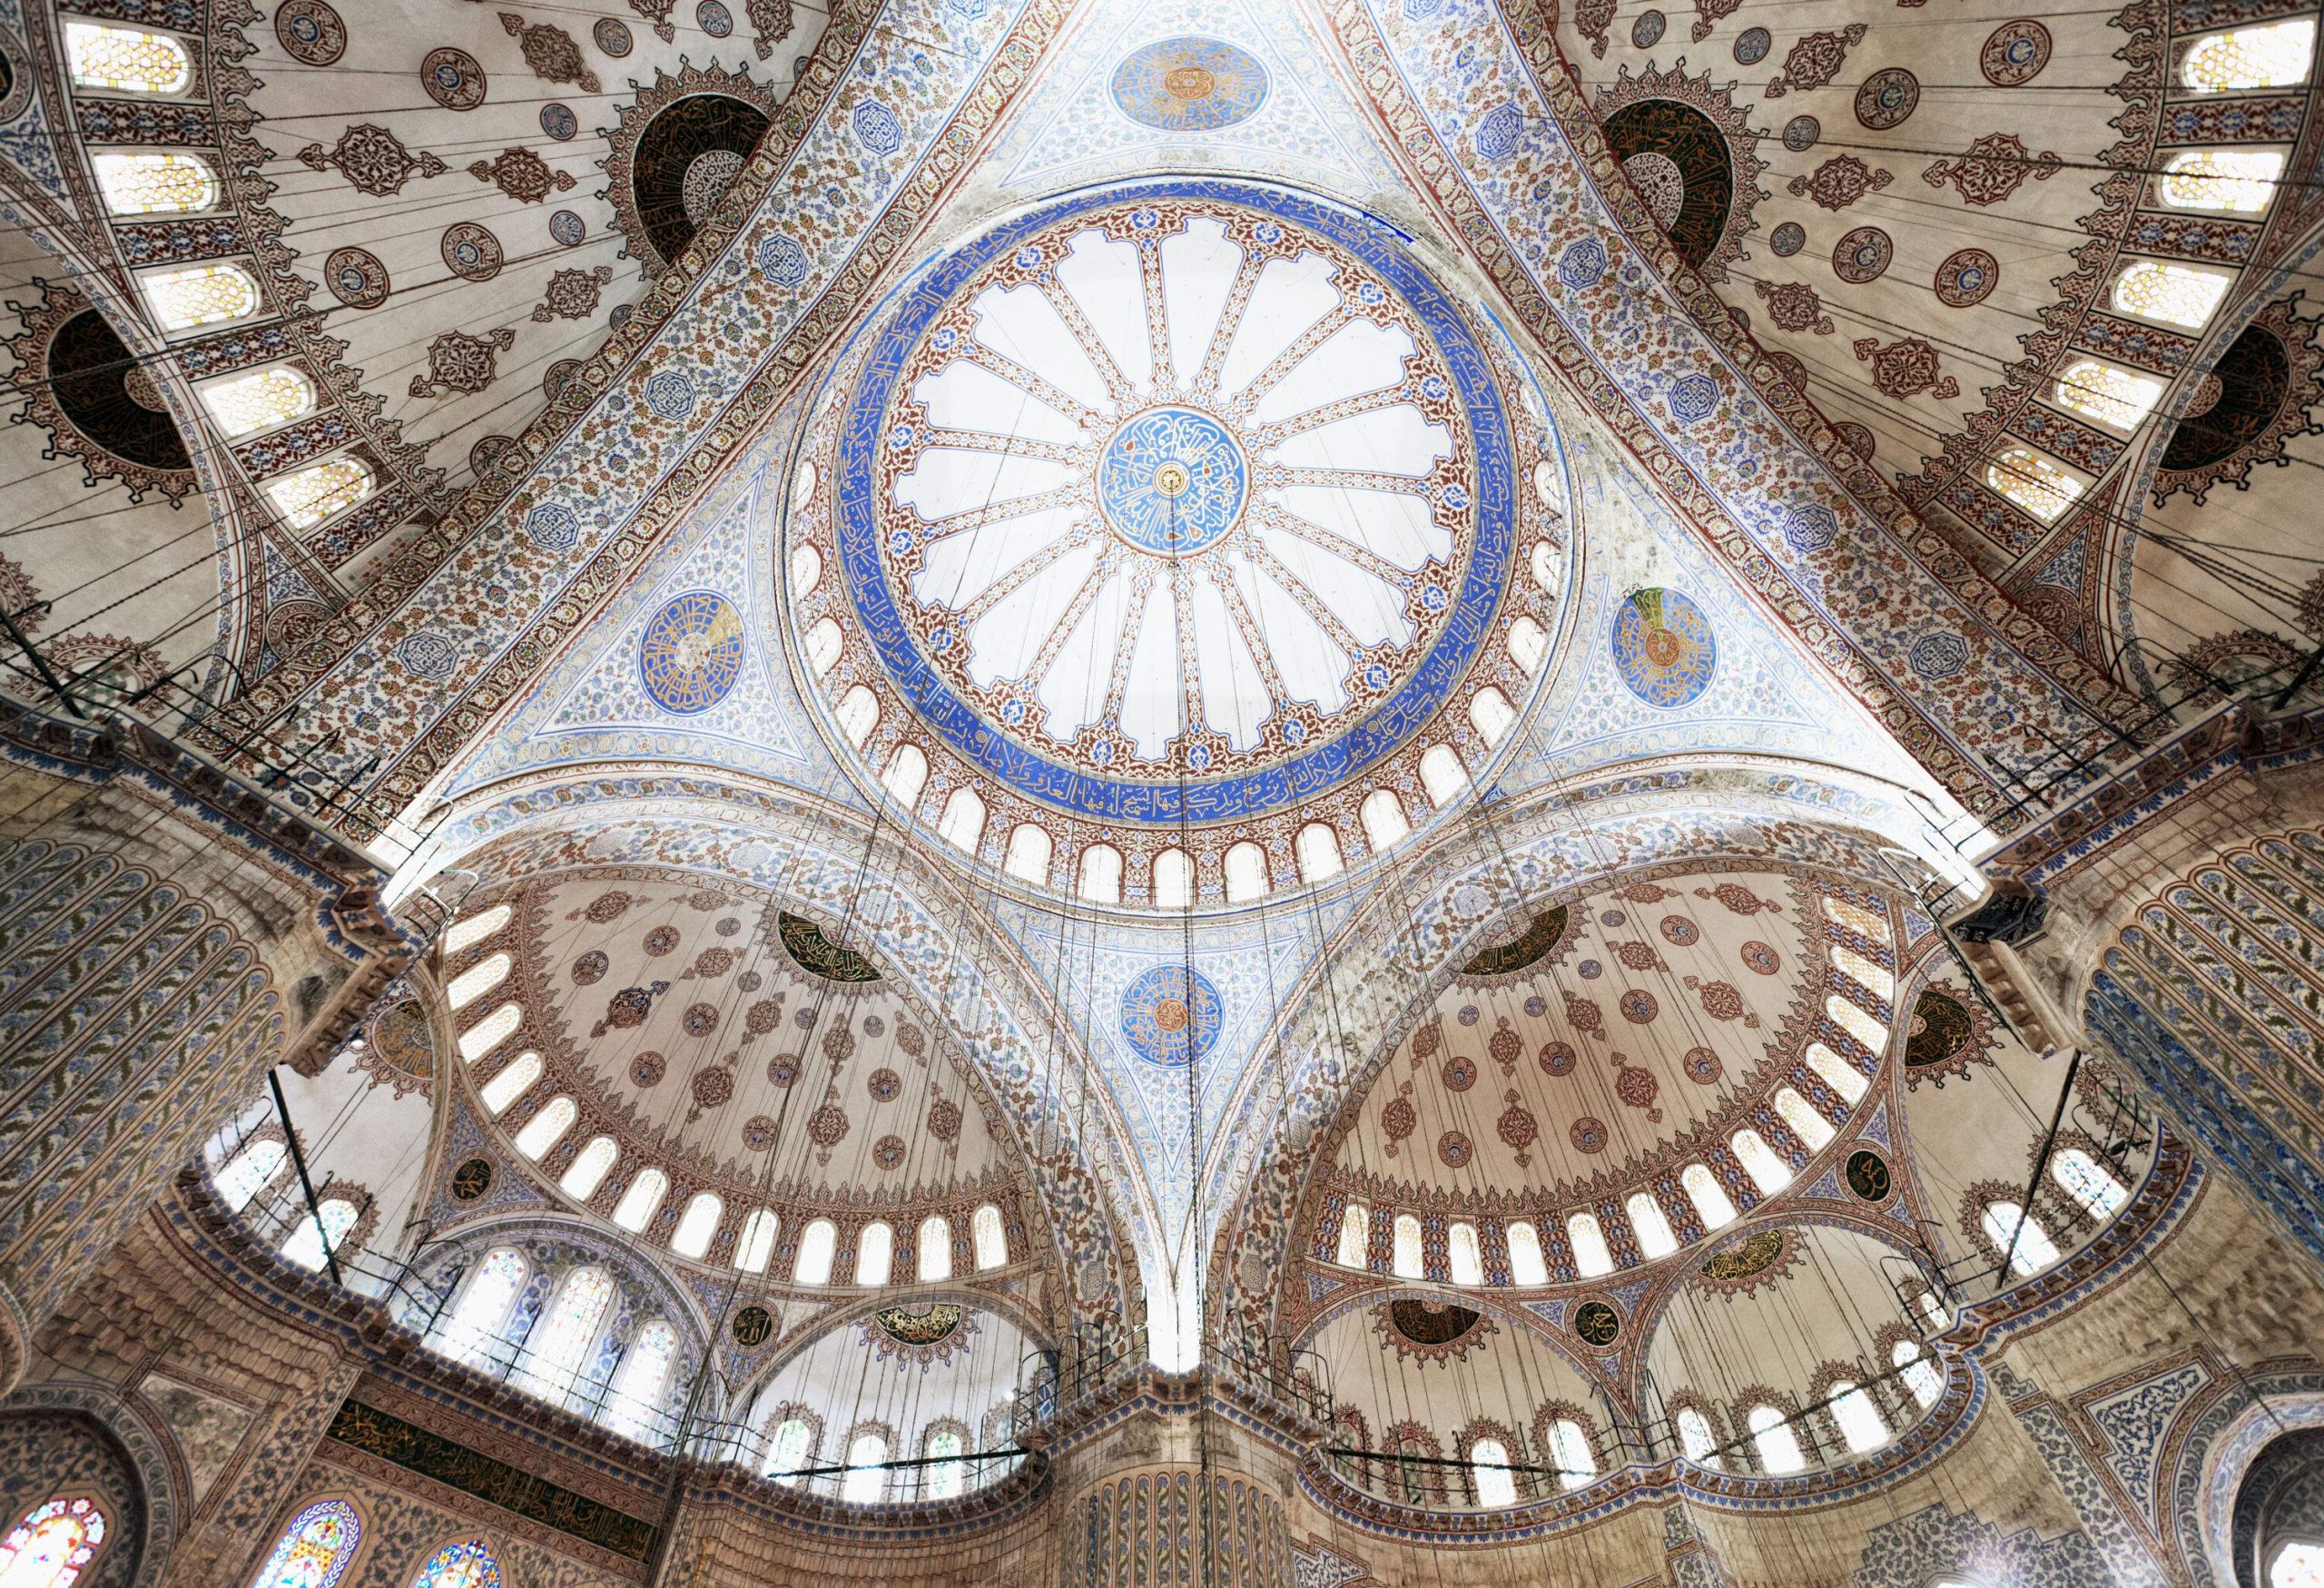 Lavishly decorated dome ceilings surrounded by stained glass windows.